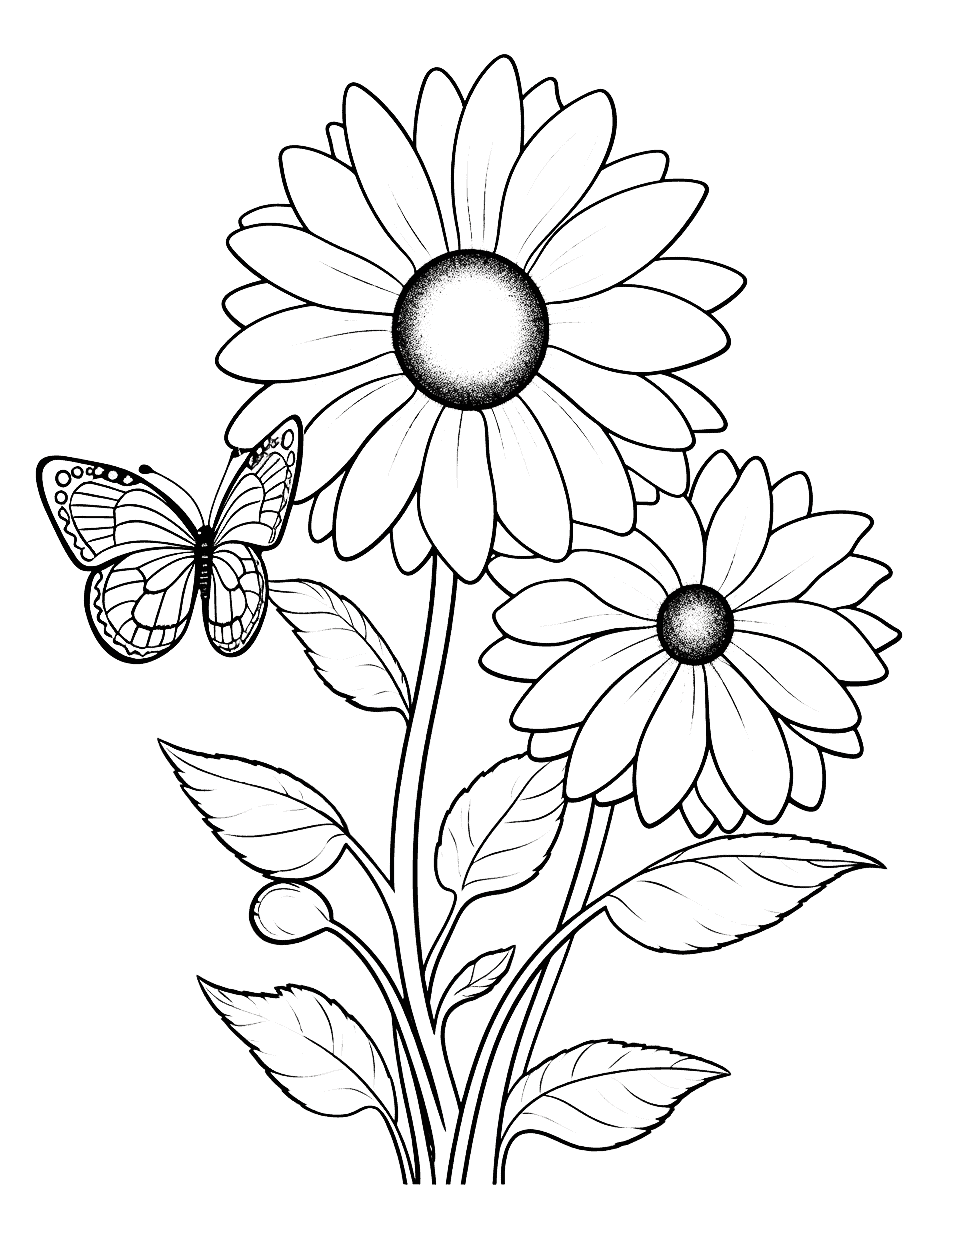 Summer Sunflower Scene Flower Coloring Page - A warm summer scene with sunflowers and butterflies.